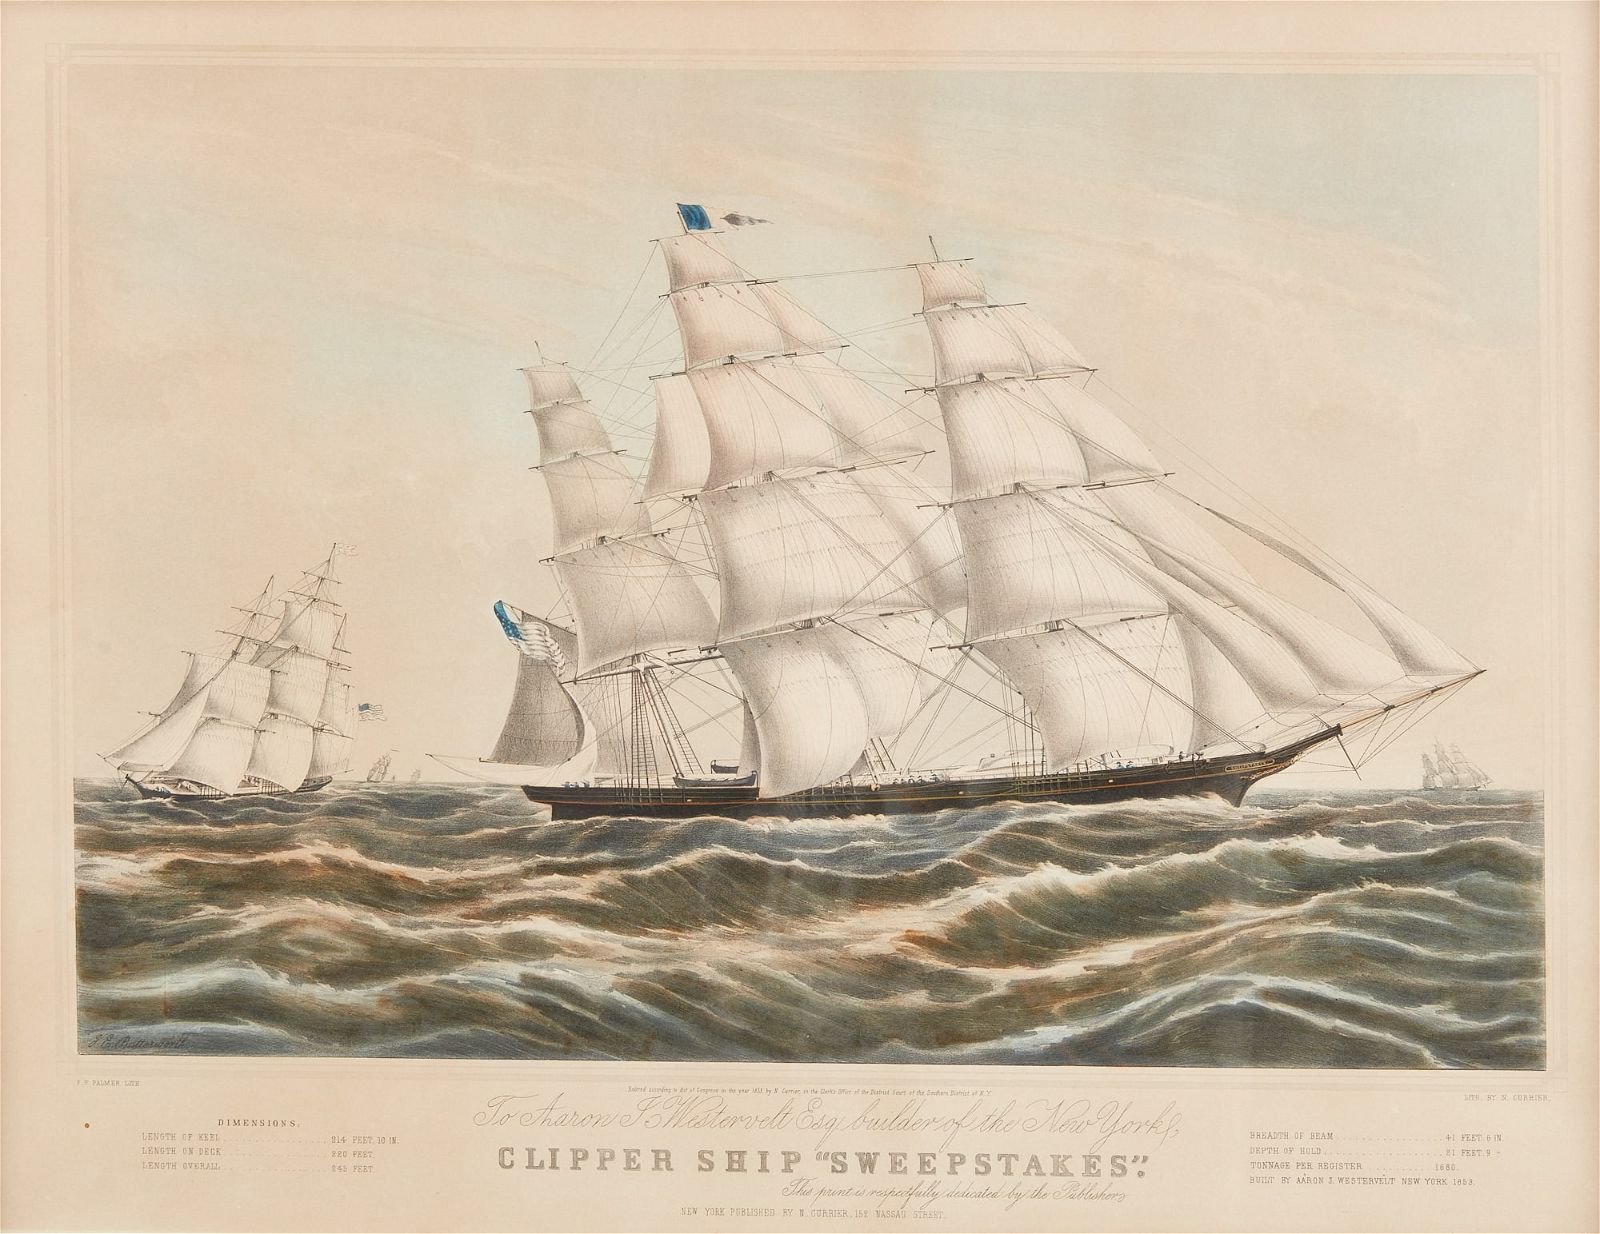 AFTER NATHANIEL CURRIER, CLIPPER